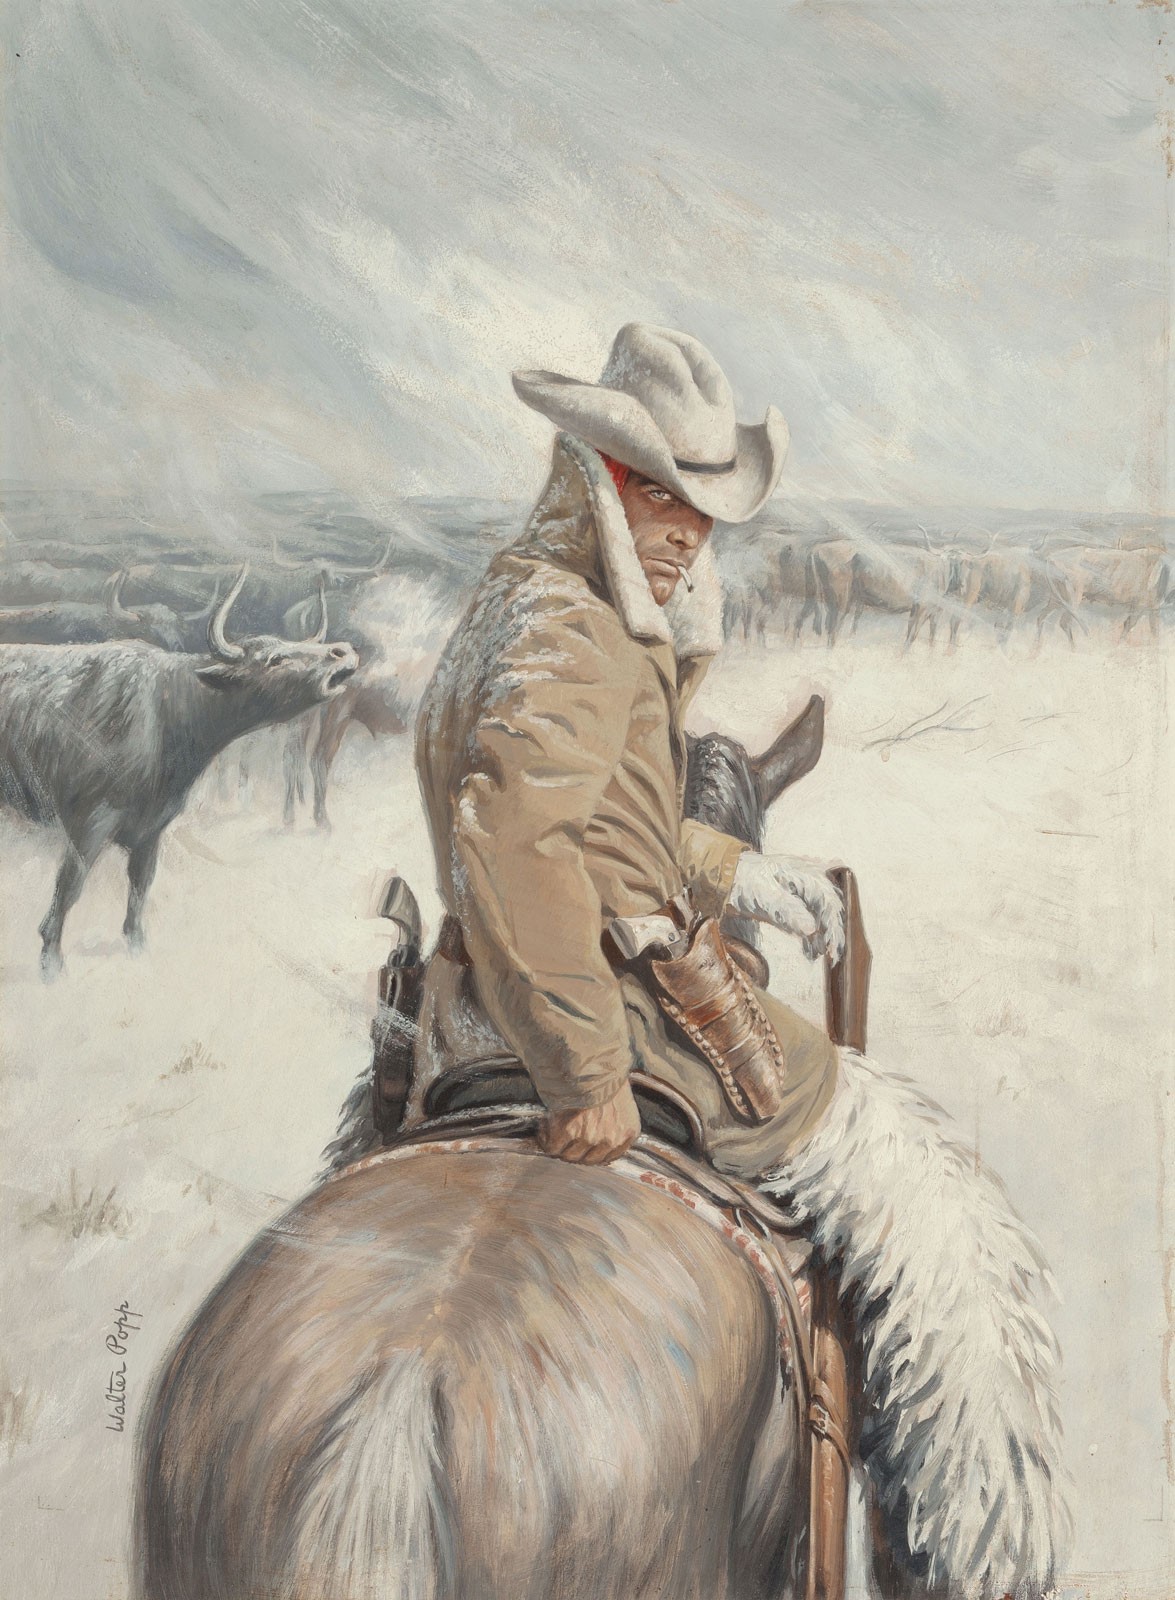 Four Texans North, Paperback Cover, c.1955, Oil on Board